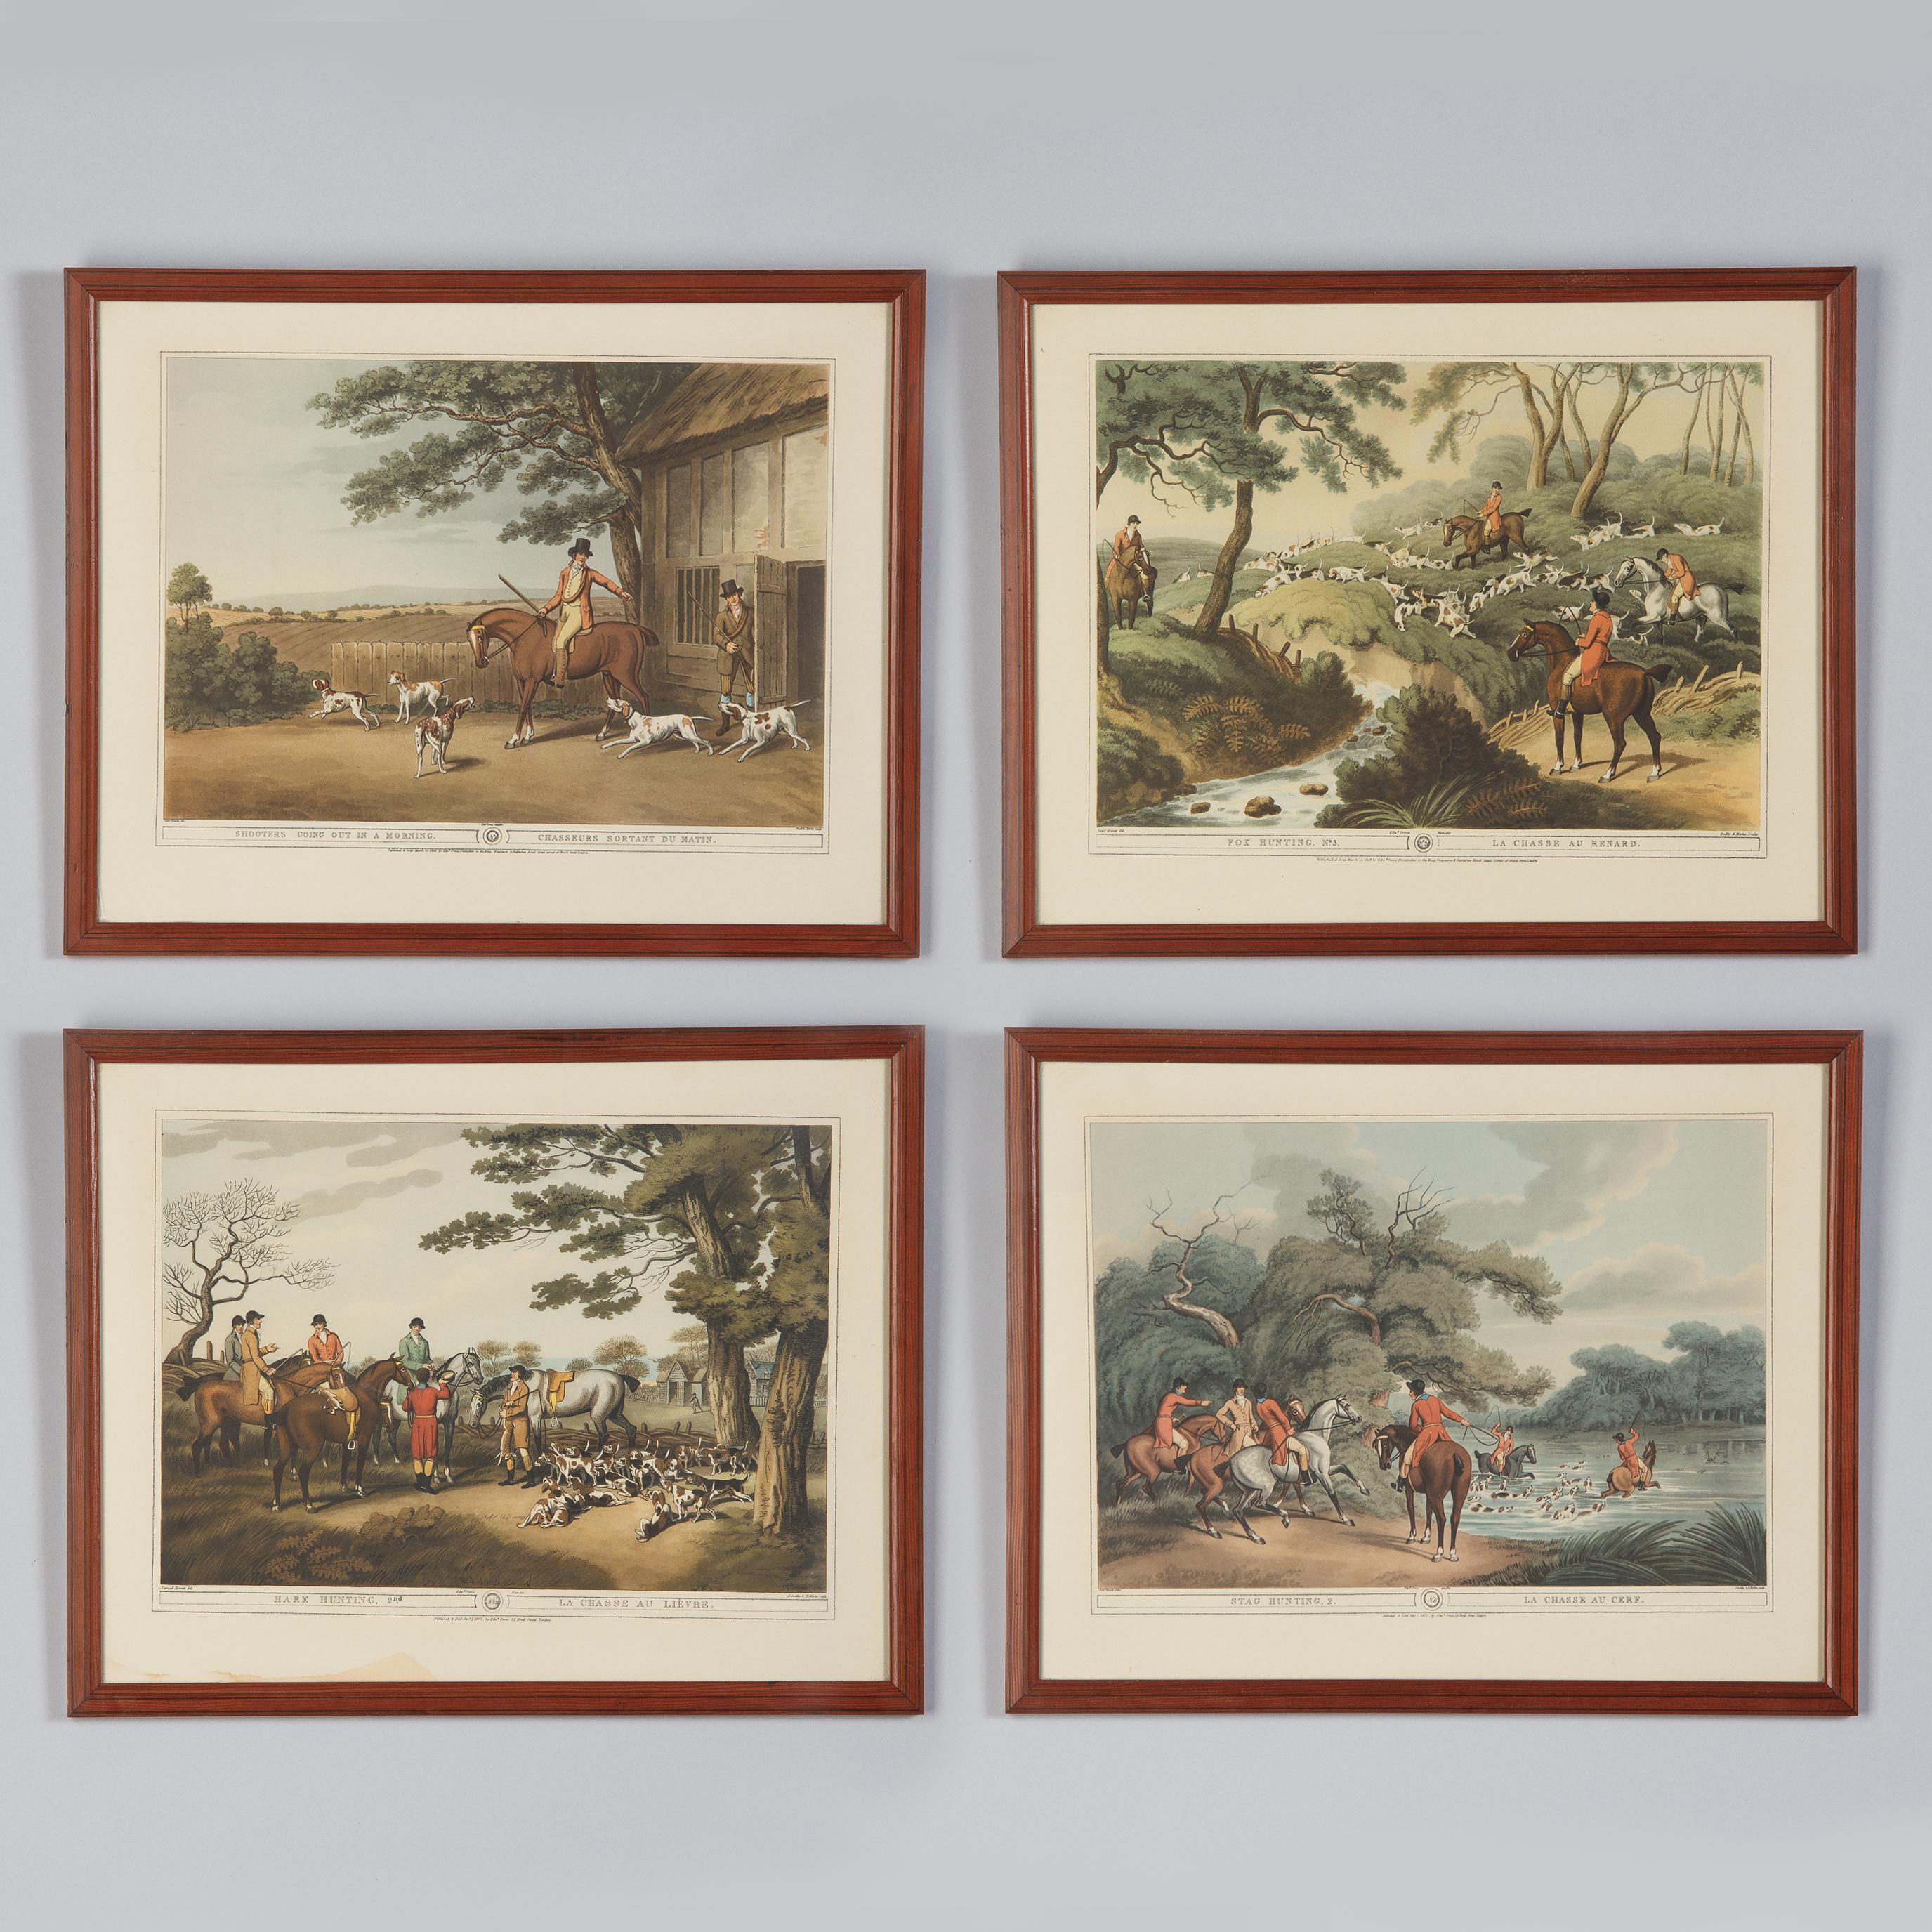 A set of four (4) engraving prints with mahogany frames representing early 1800s hunting scenes. They are titled 